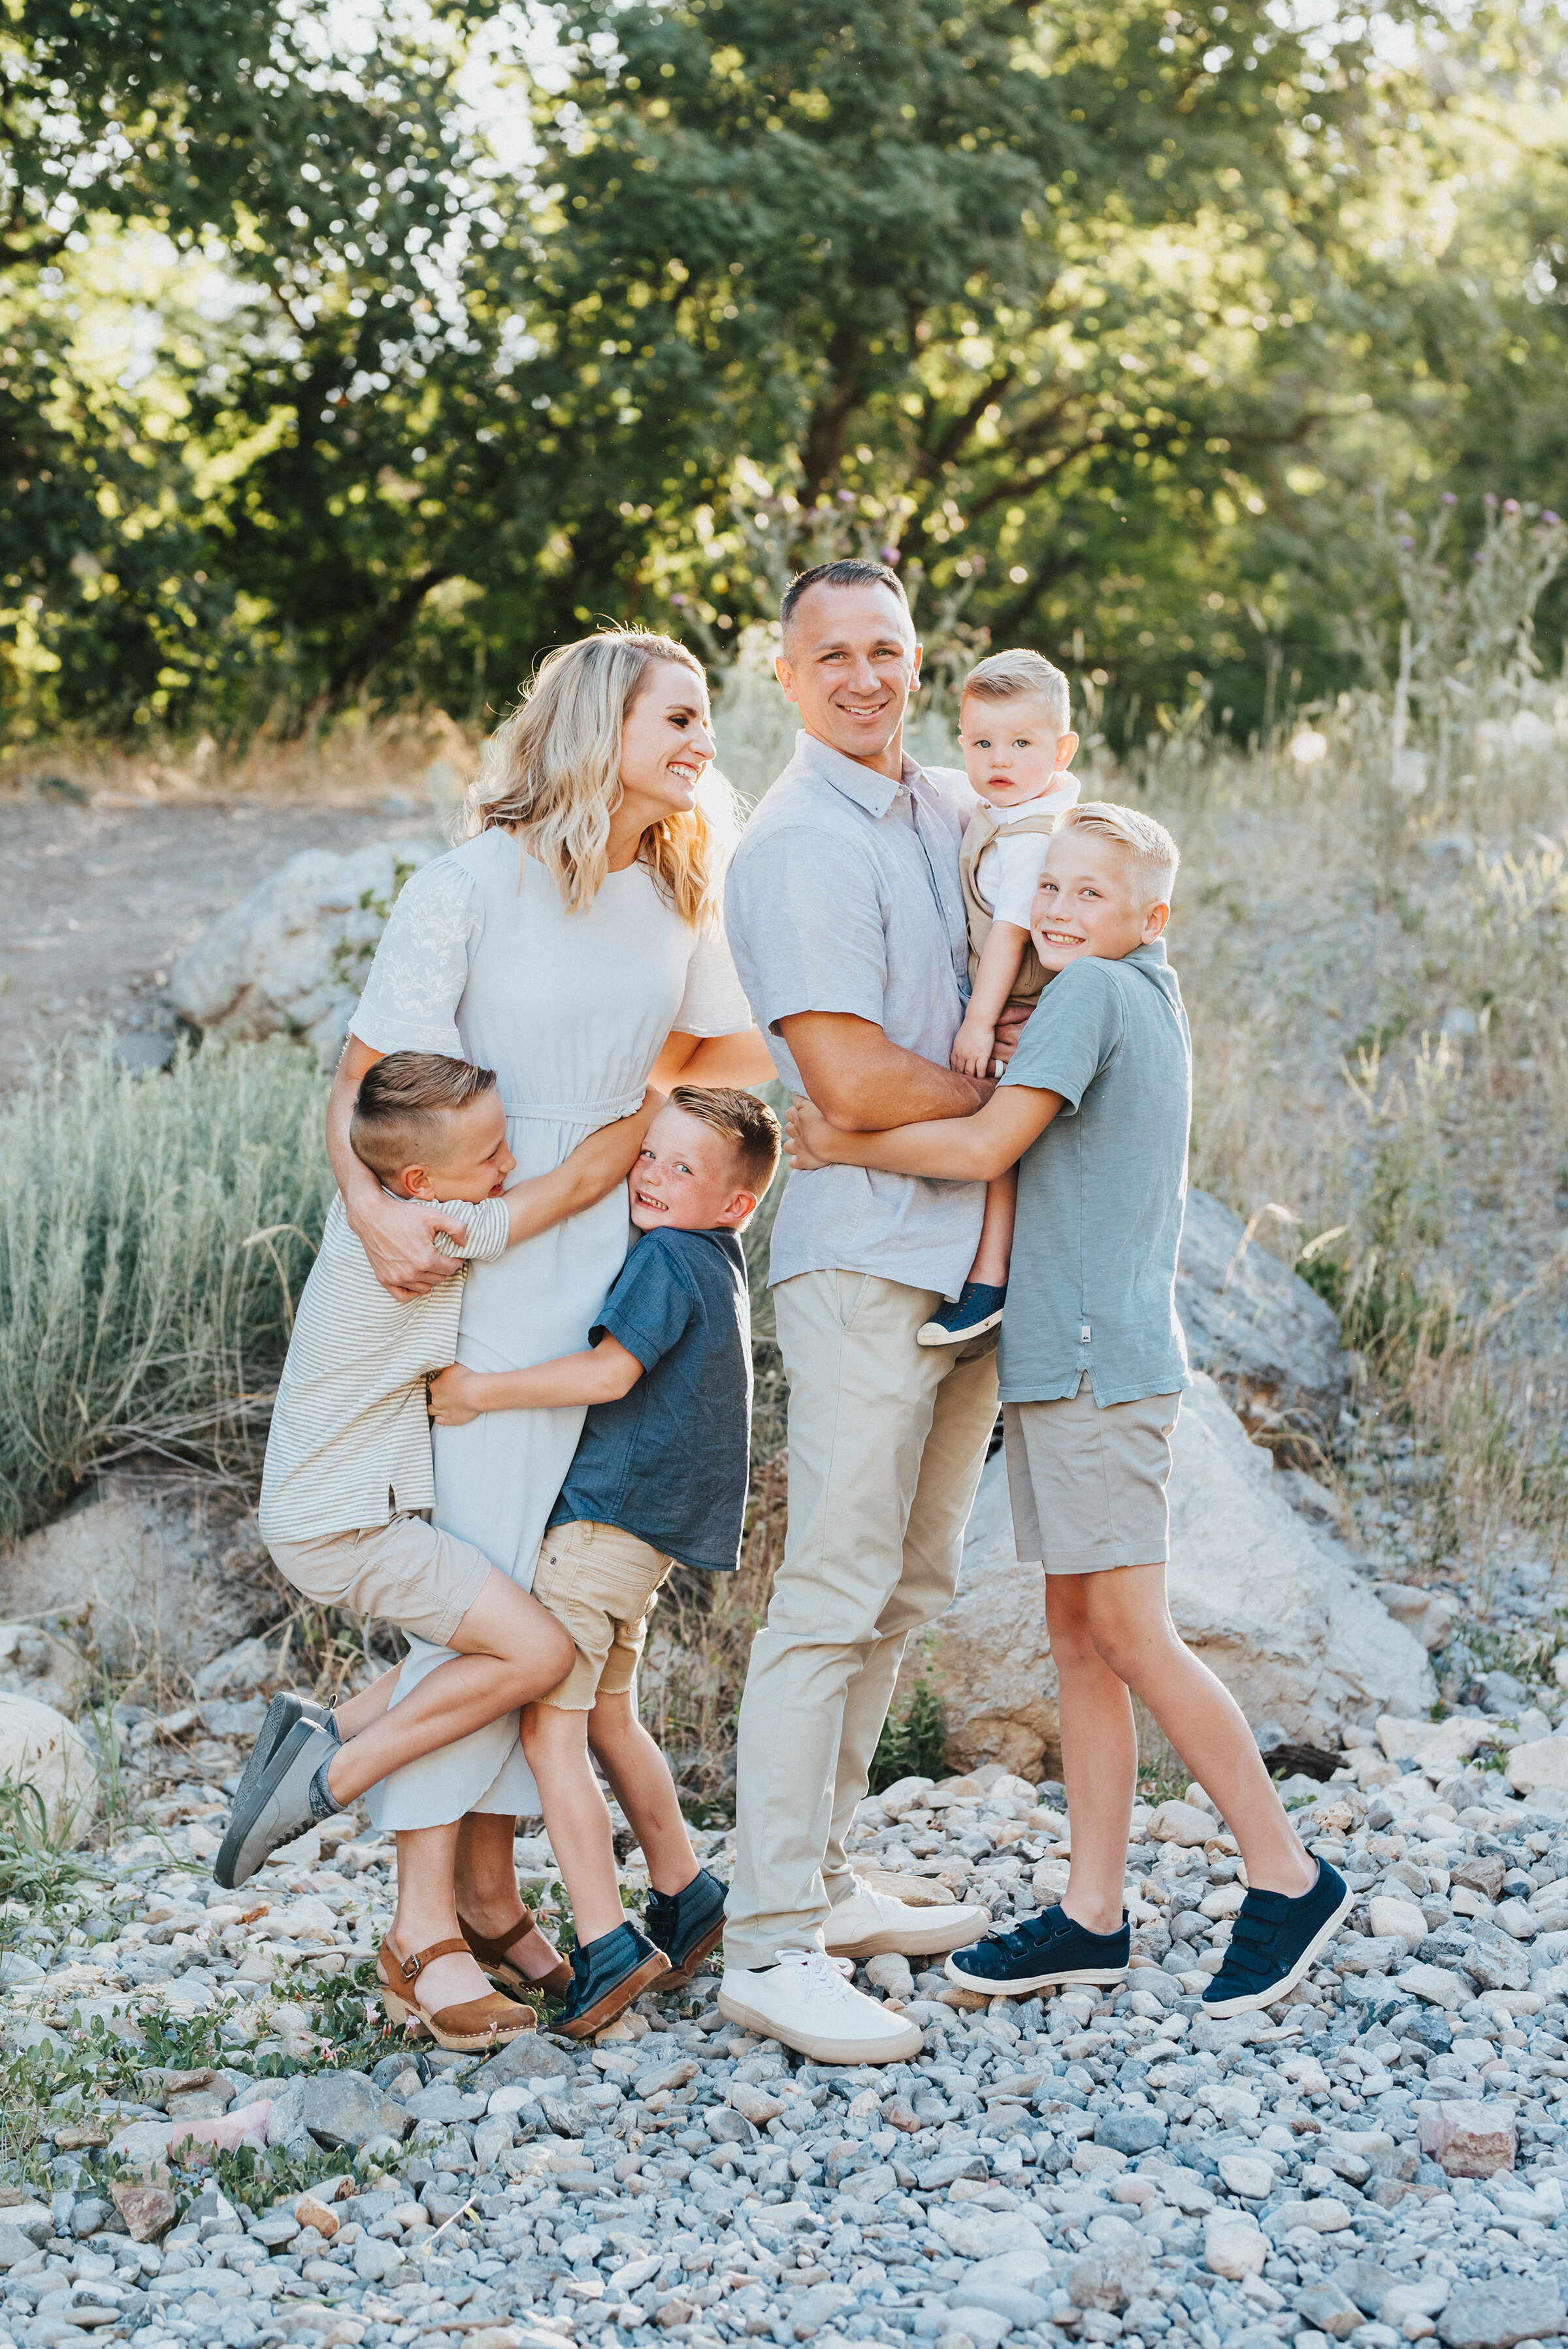  Beautiful family is giving each other tight hugs with the sun peeking out from behind the trees. Light blue and khakis soft outdoor setting looking at different directions family all together #providencecanyon #utahphotography #utah #familyphoto #family #familyphotography #familyphotographer #outdoorphotoshoot #hugs #familyhugs #familyhugging #sillyhugs 